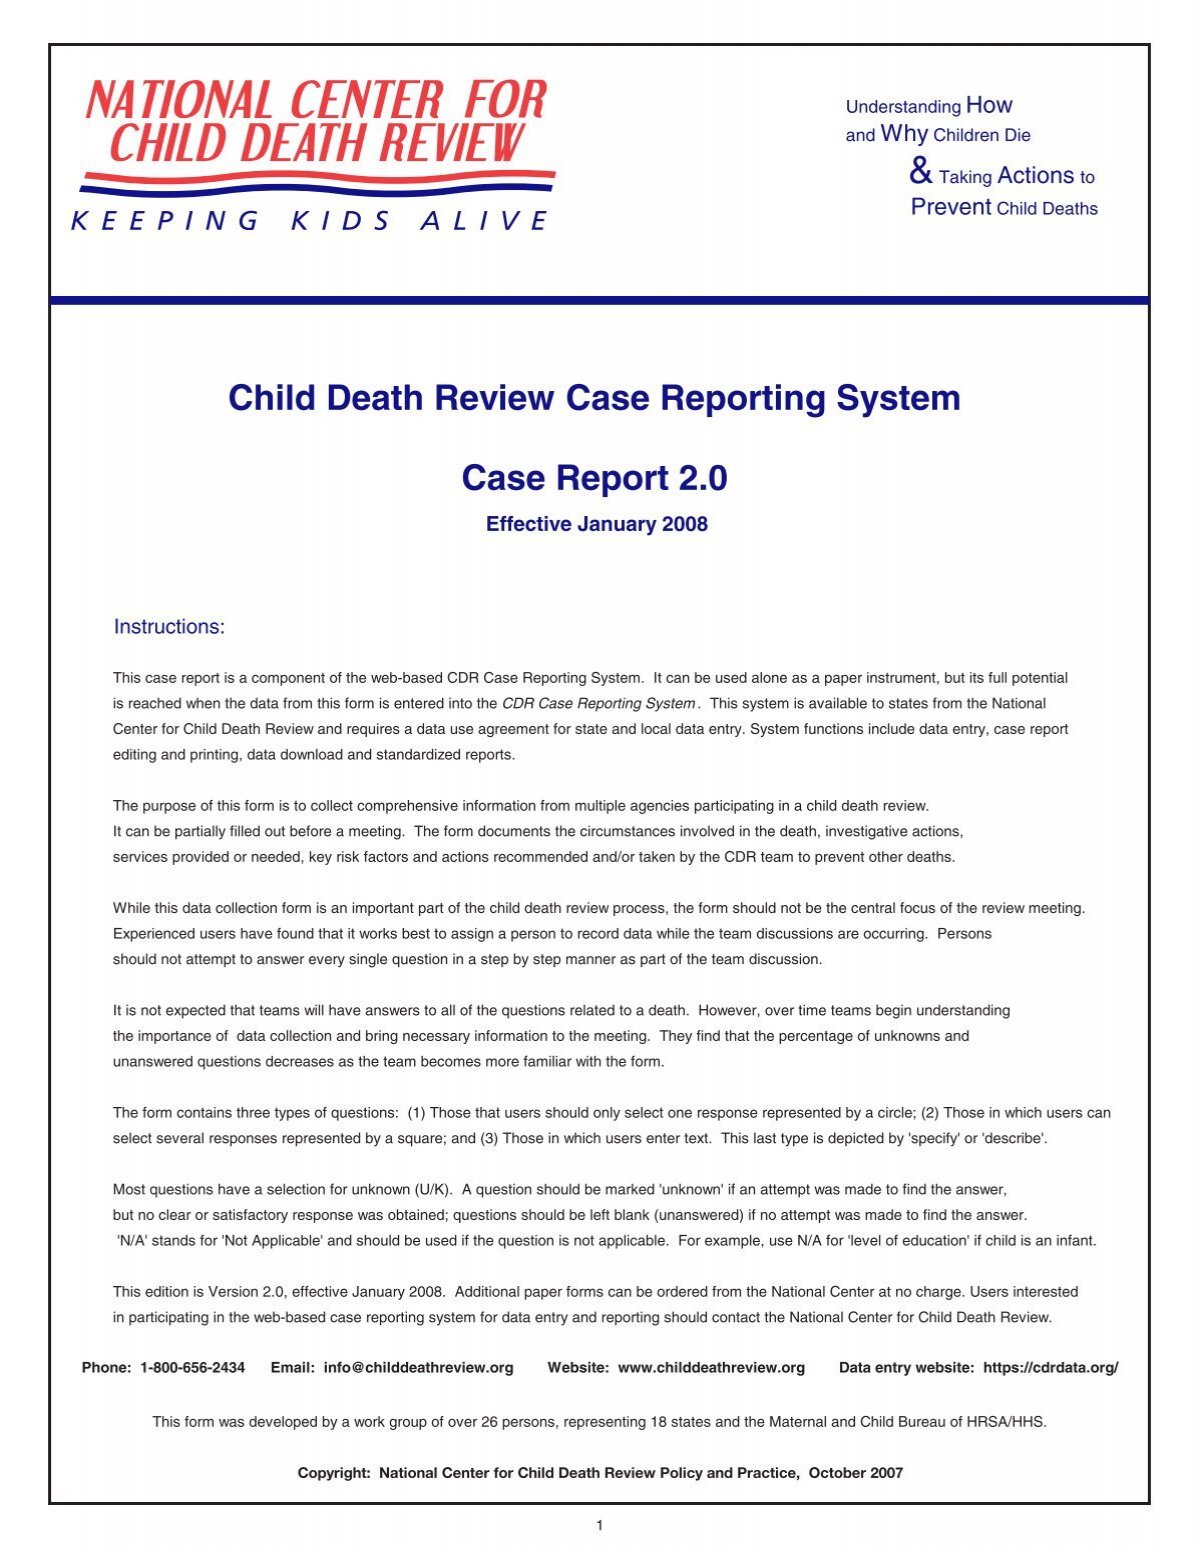 child-death-review-case-report-form-keeping-kids-alive